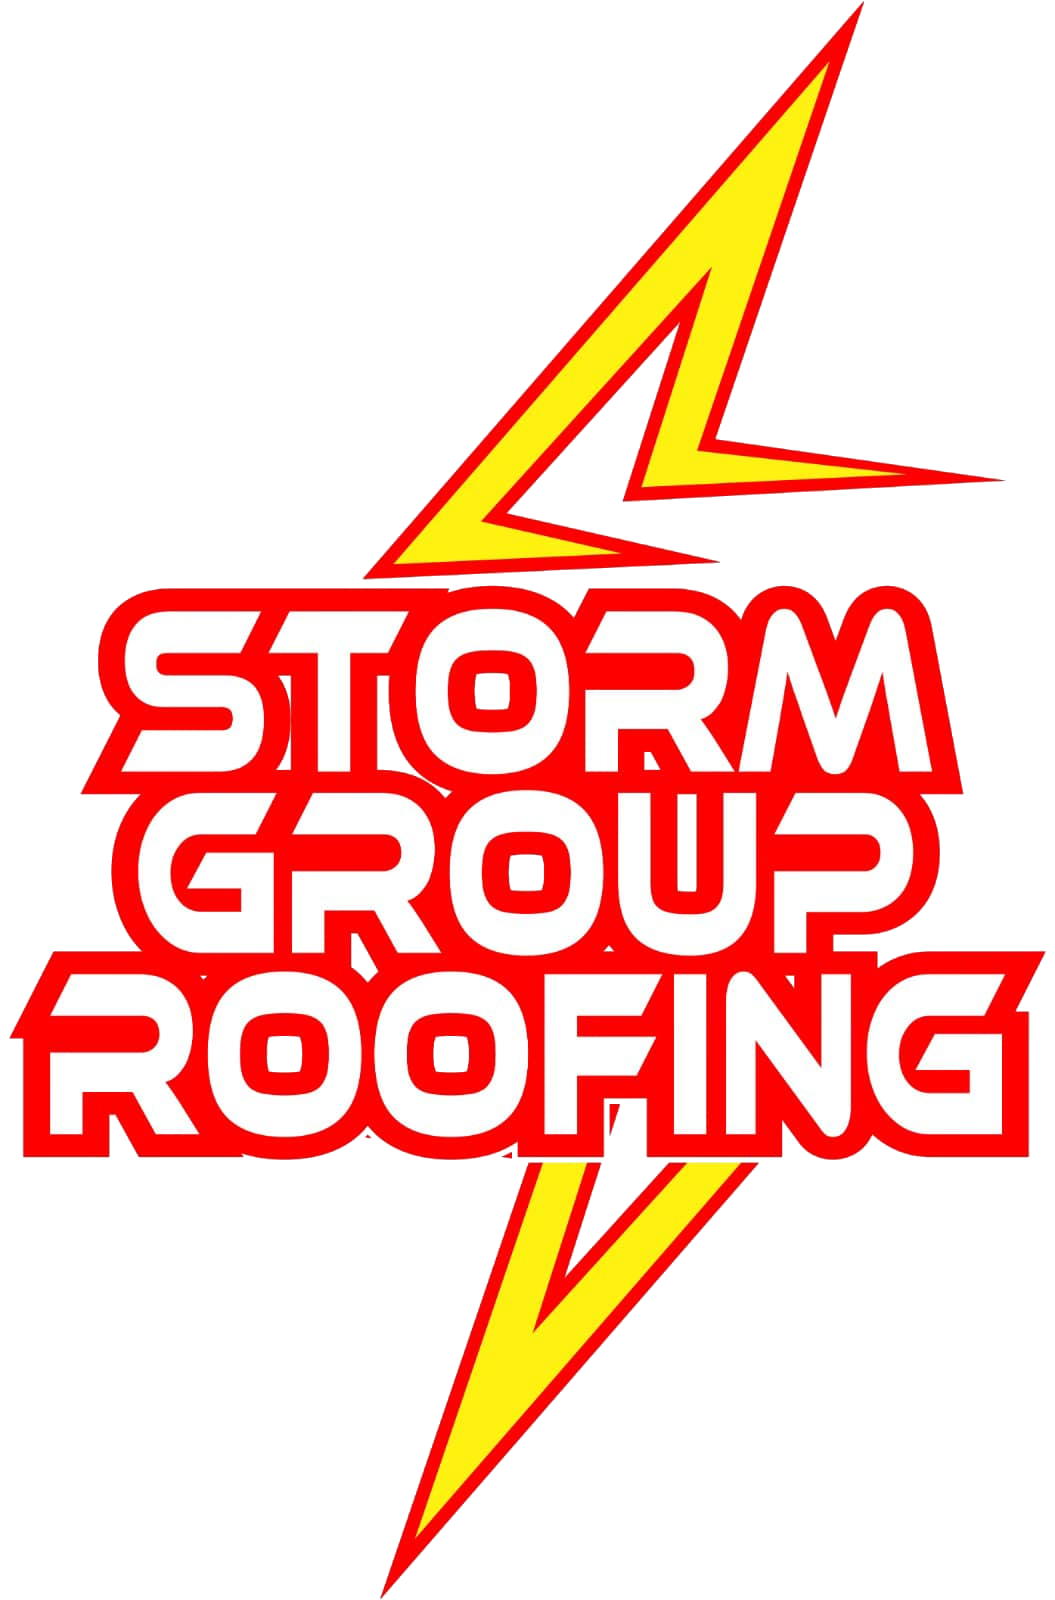 Storm Group Roofing Inc. logo